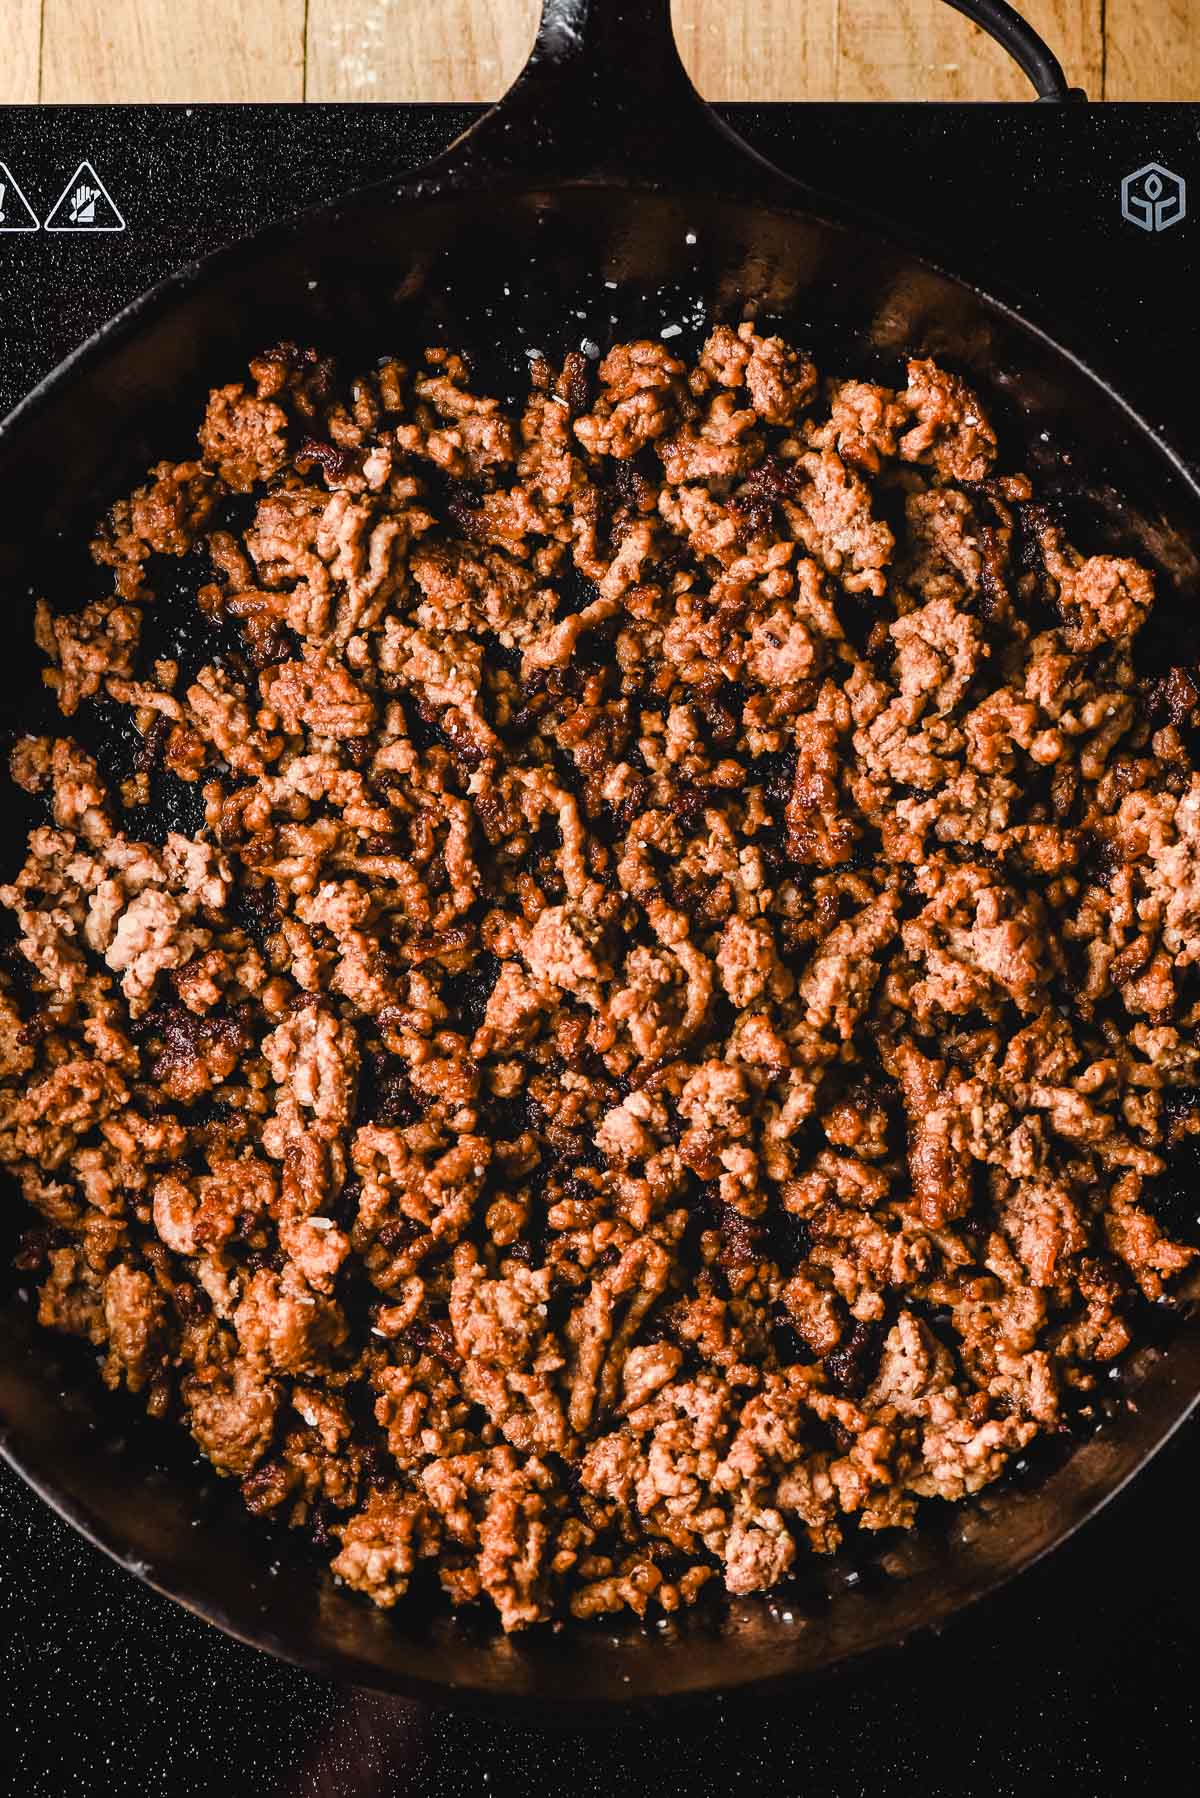 Cooked ground beef with crispy browned bits in a cast iron skillet.